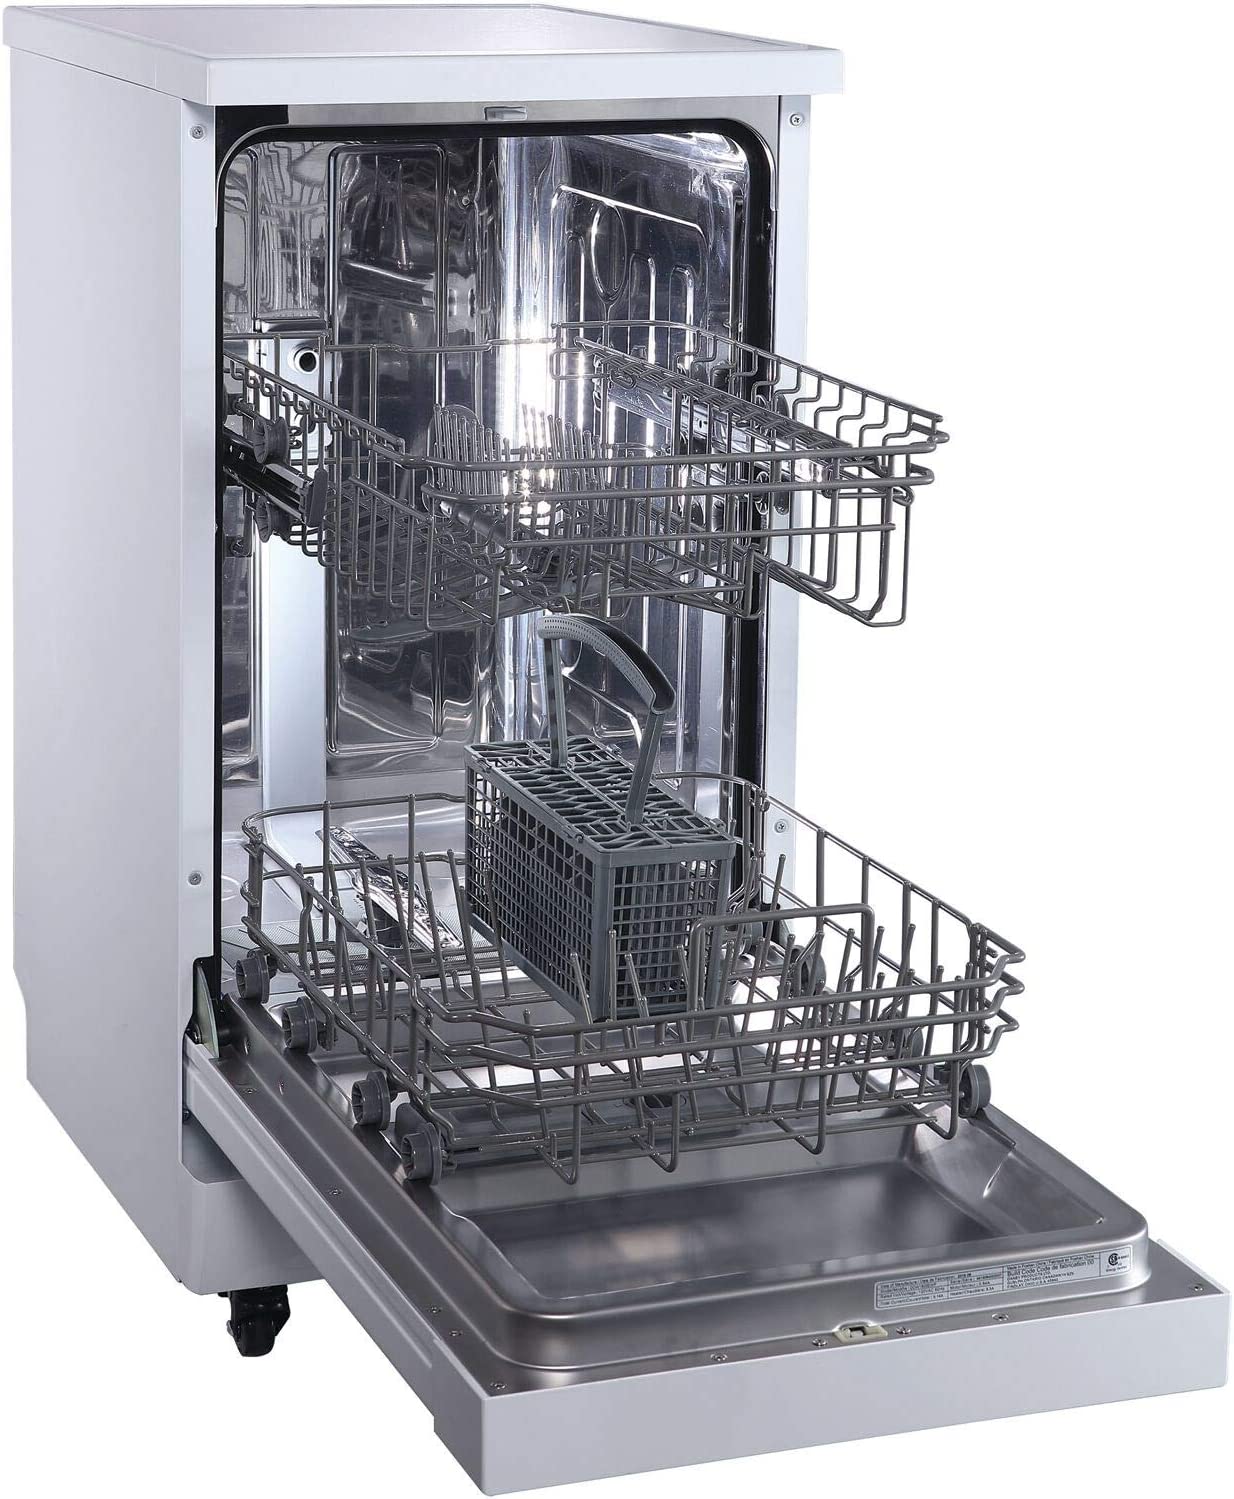 Danby DDW1805EWP 18 inch Portable Dishwasher with 8 Place Setting Capacity; 4 Wash Cycles; Energy Star Certified; Adjustable Upper Rack; in White-open